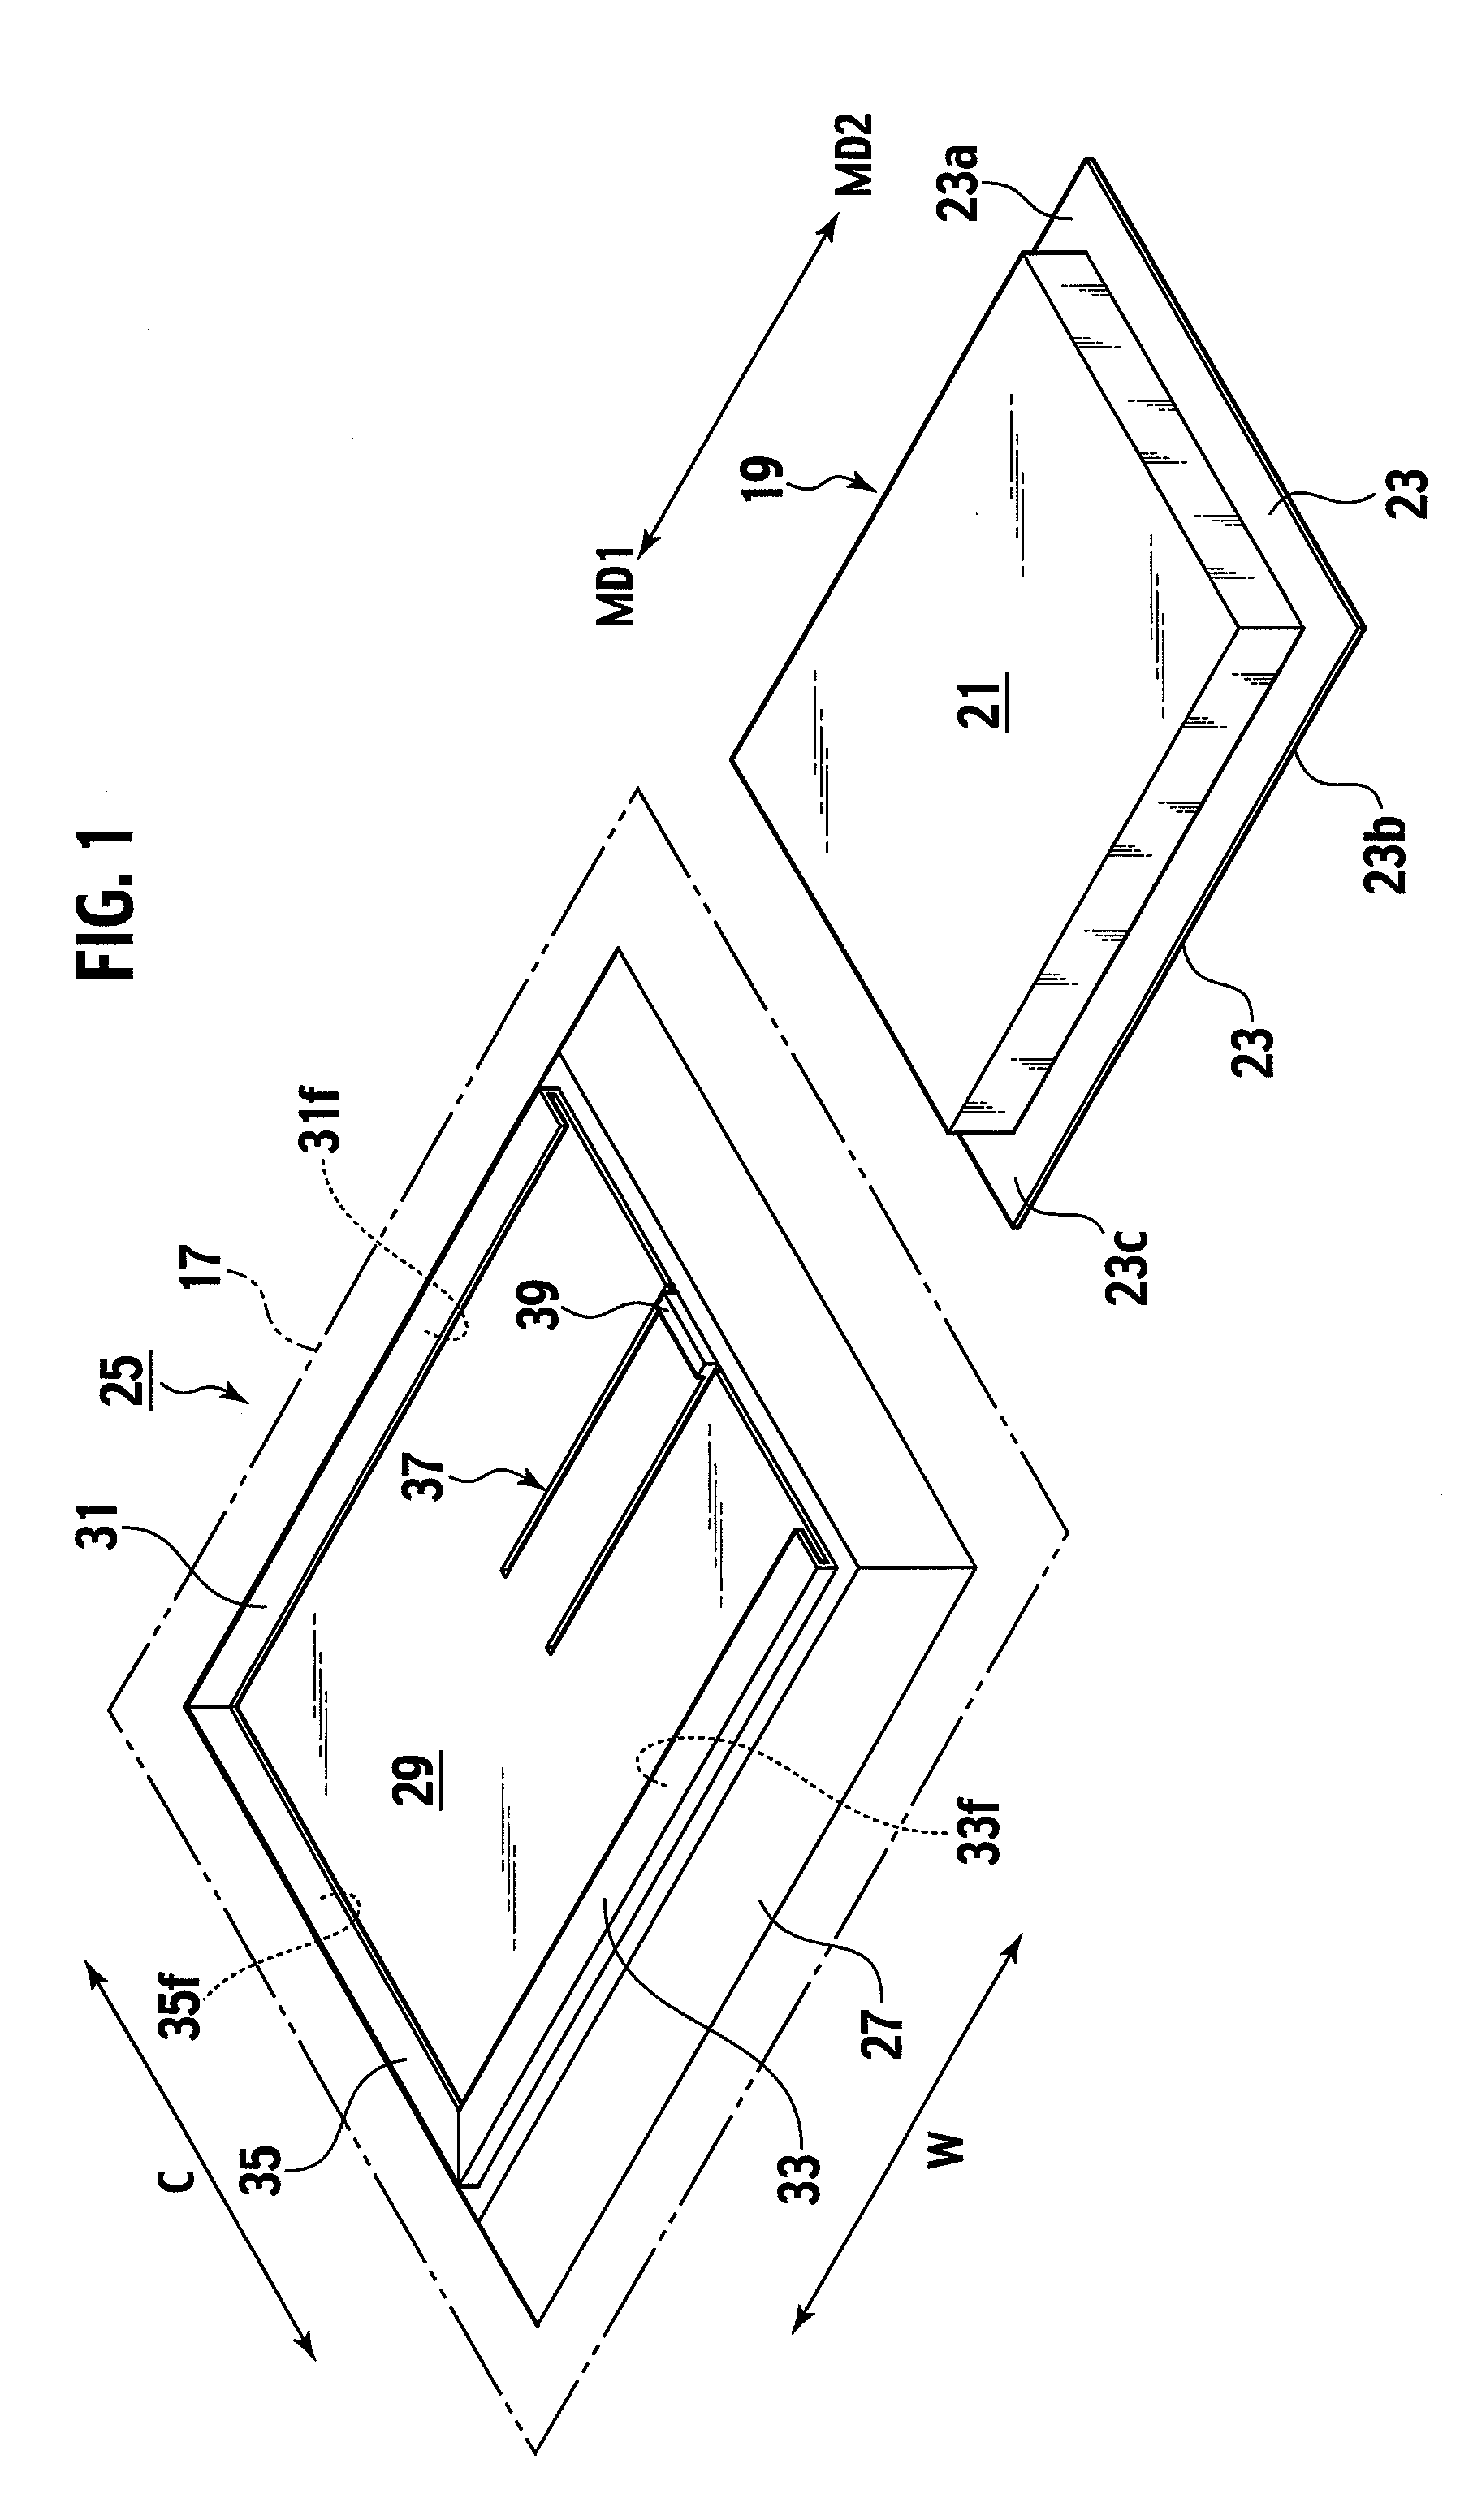 Mounting structure of electronic device and pneumatic tire